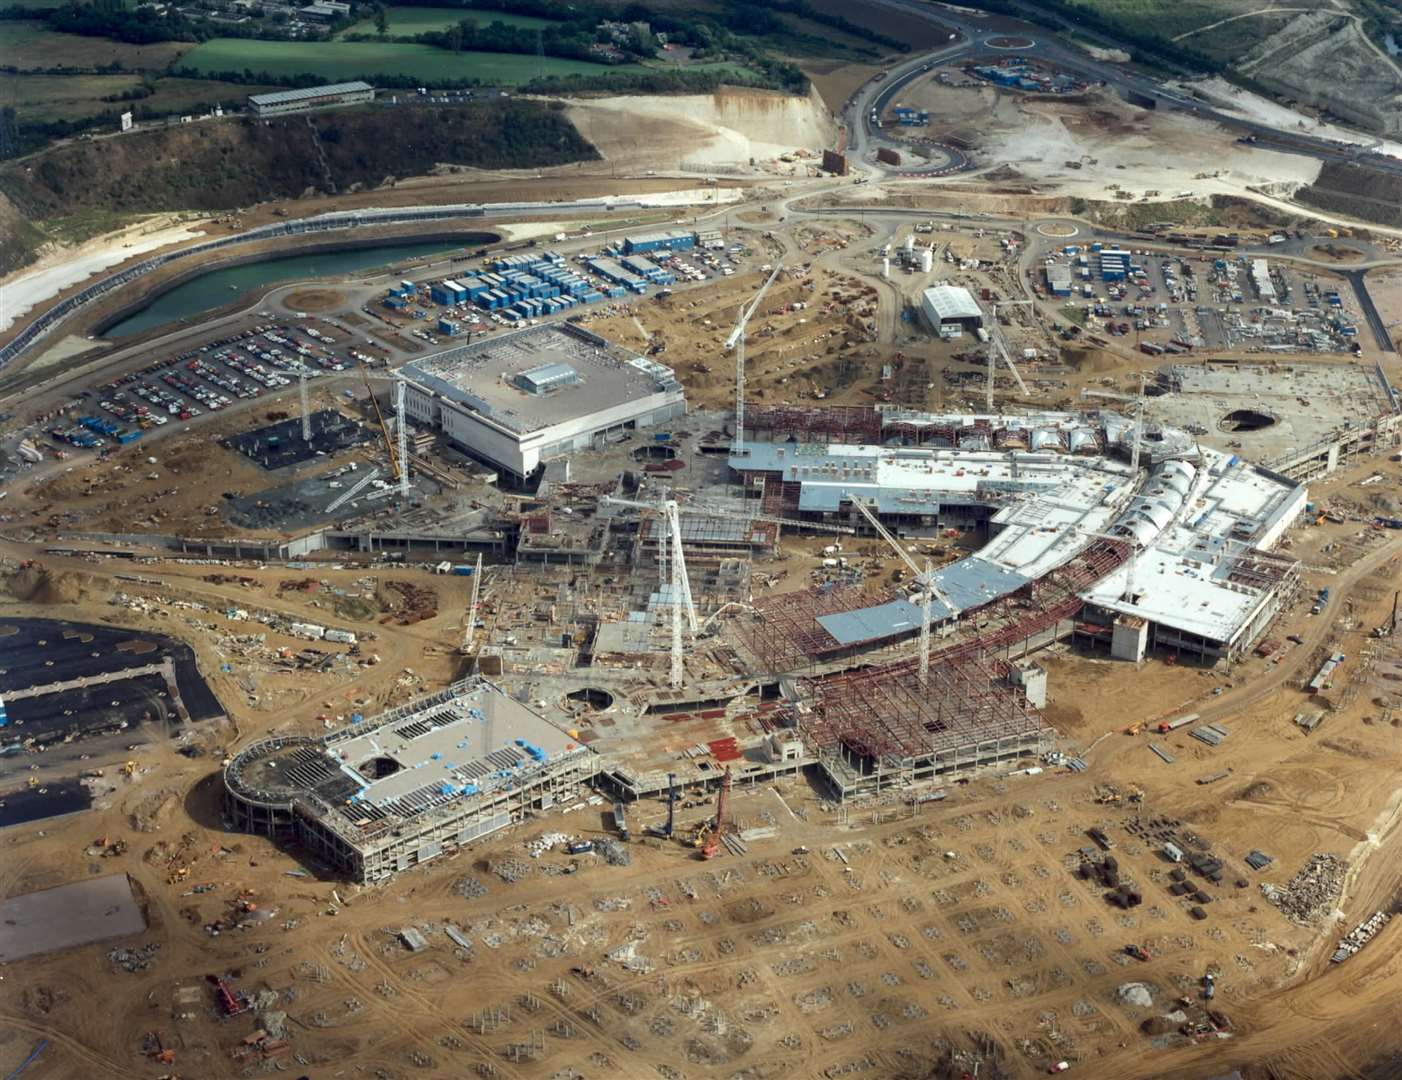 One year into the construction of Bluewater, pictured in 1997... the 240-acre site became Europe's largest shopping complex when it opened in 1999. Pic: Chorley Handford